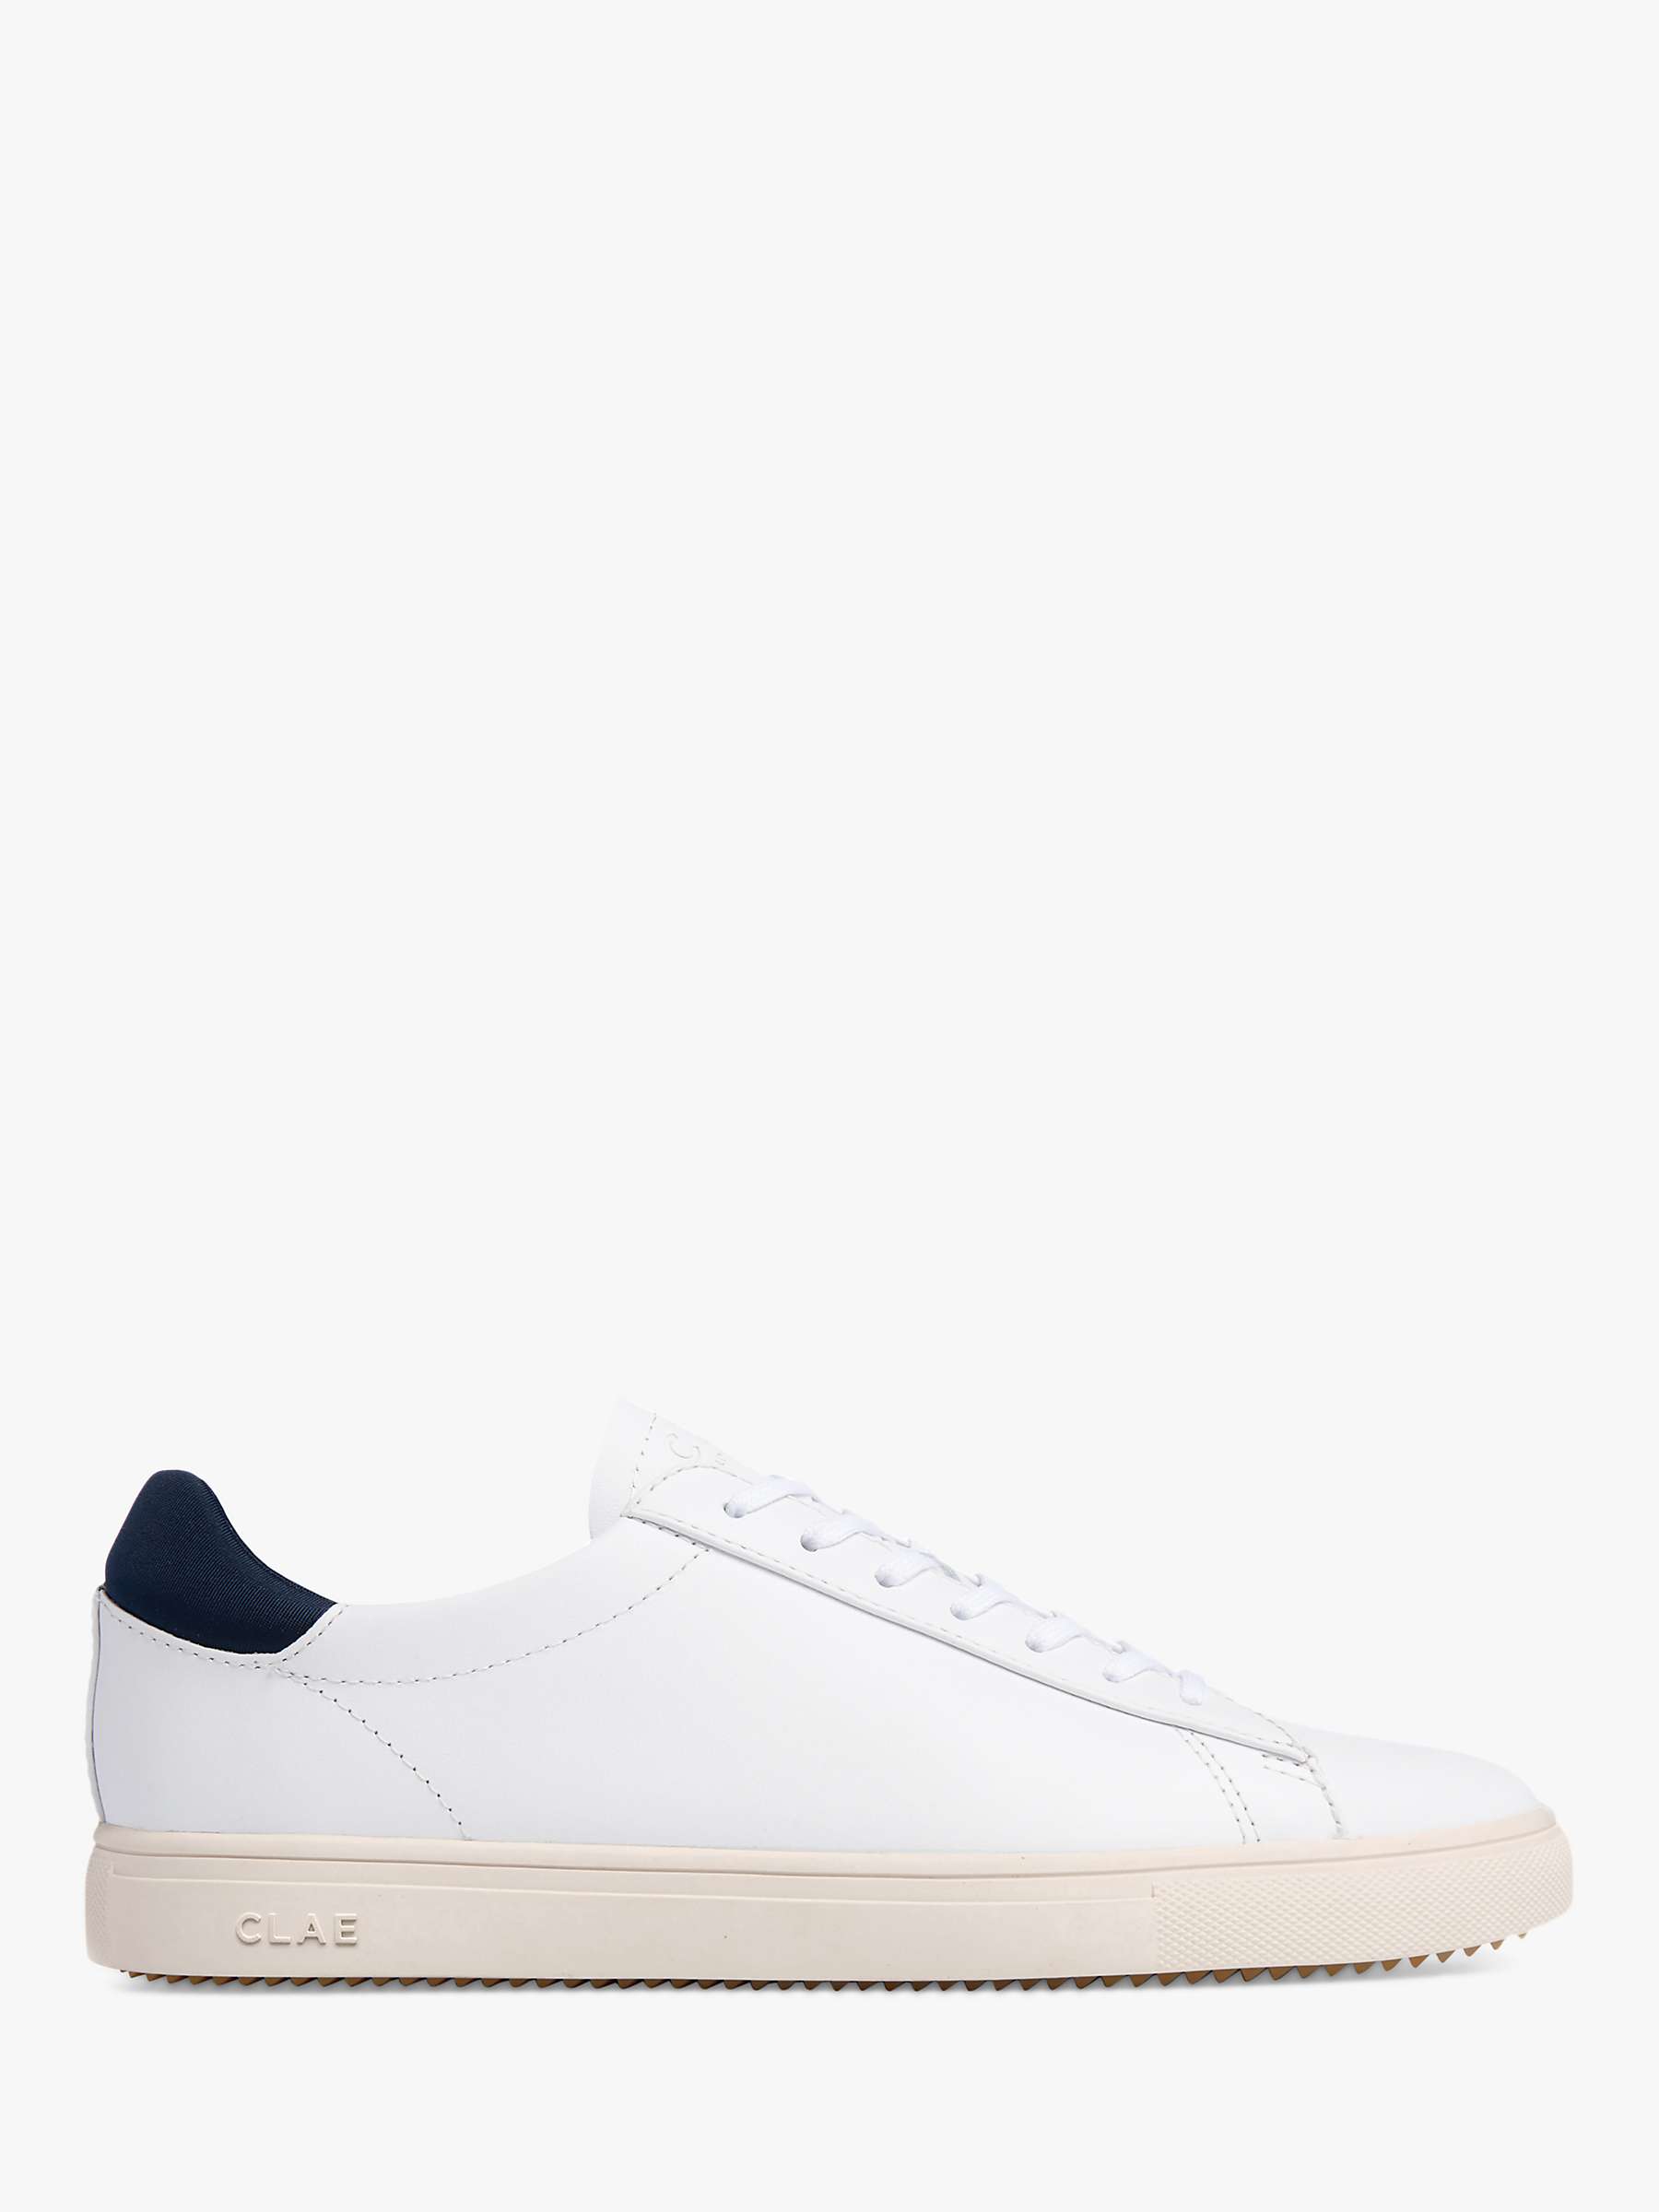 CLAE Bradley Essentials Leather Trainers, White/Navy at John Lewis ...